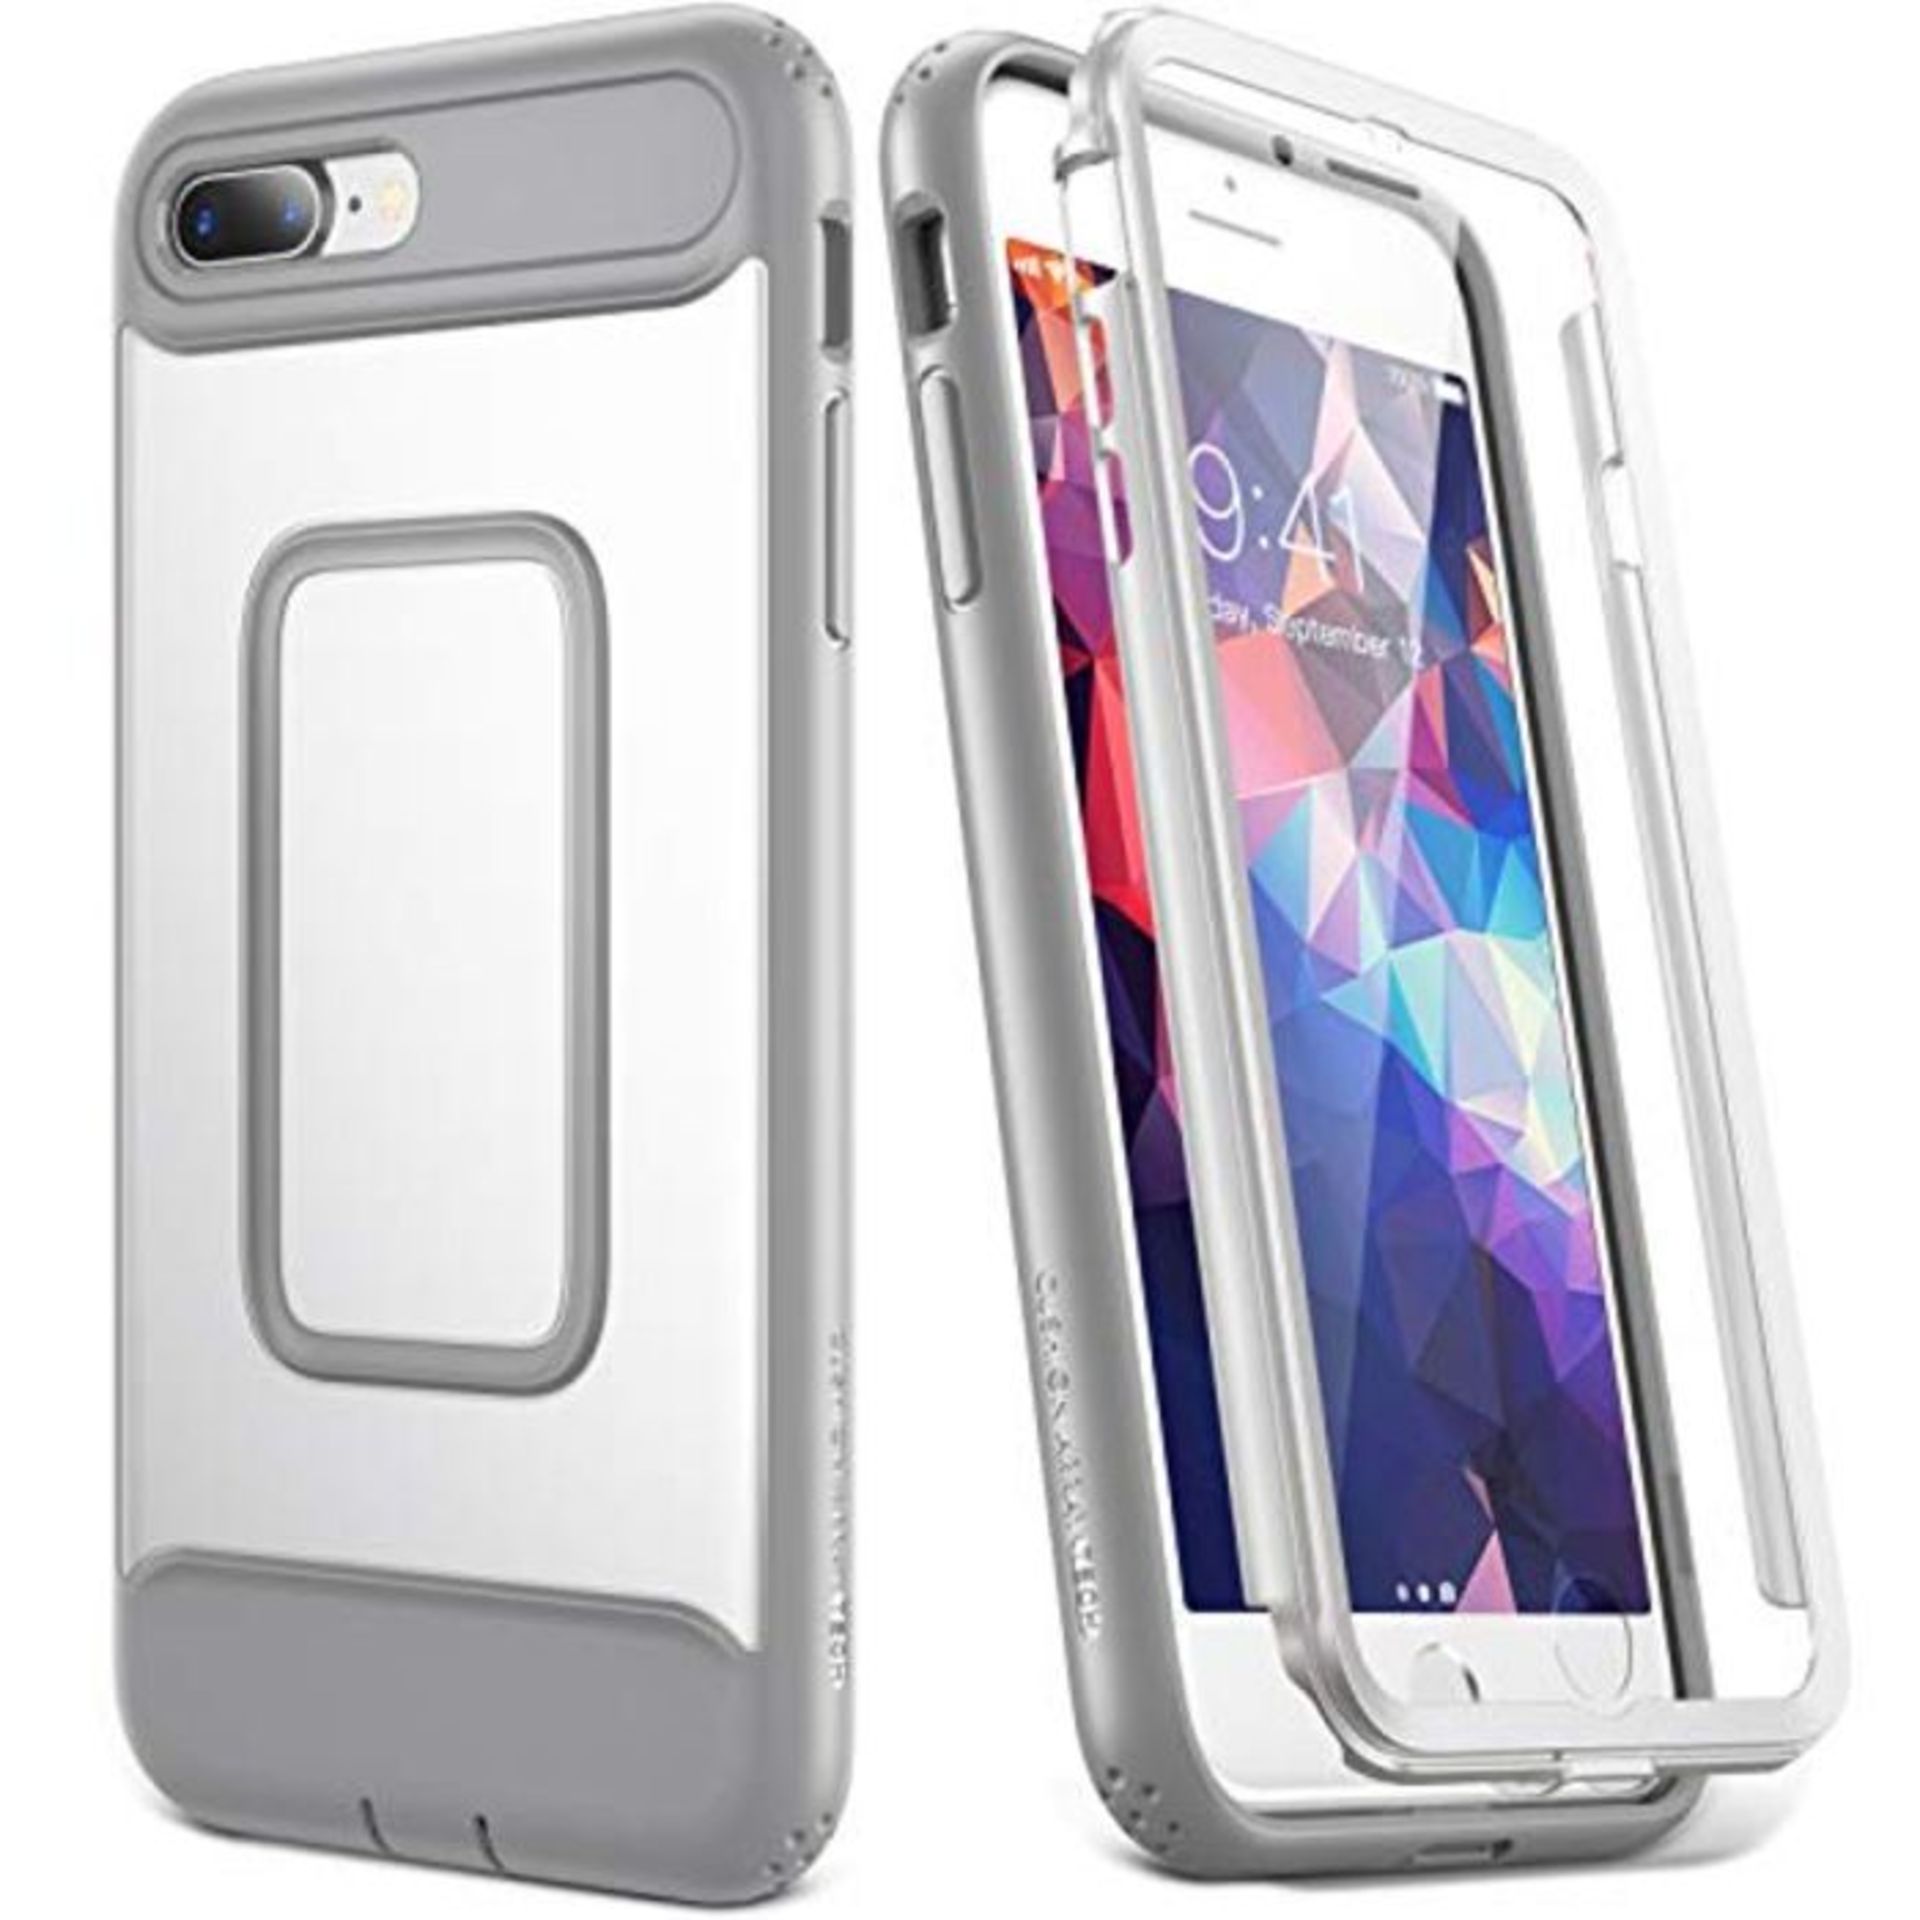 YOUMAKER iPhone 8 Plus Case iPhone 7 Plus Case, Full Body Heavy Duty Protection Shockp